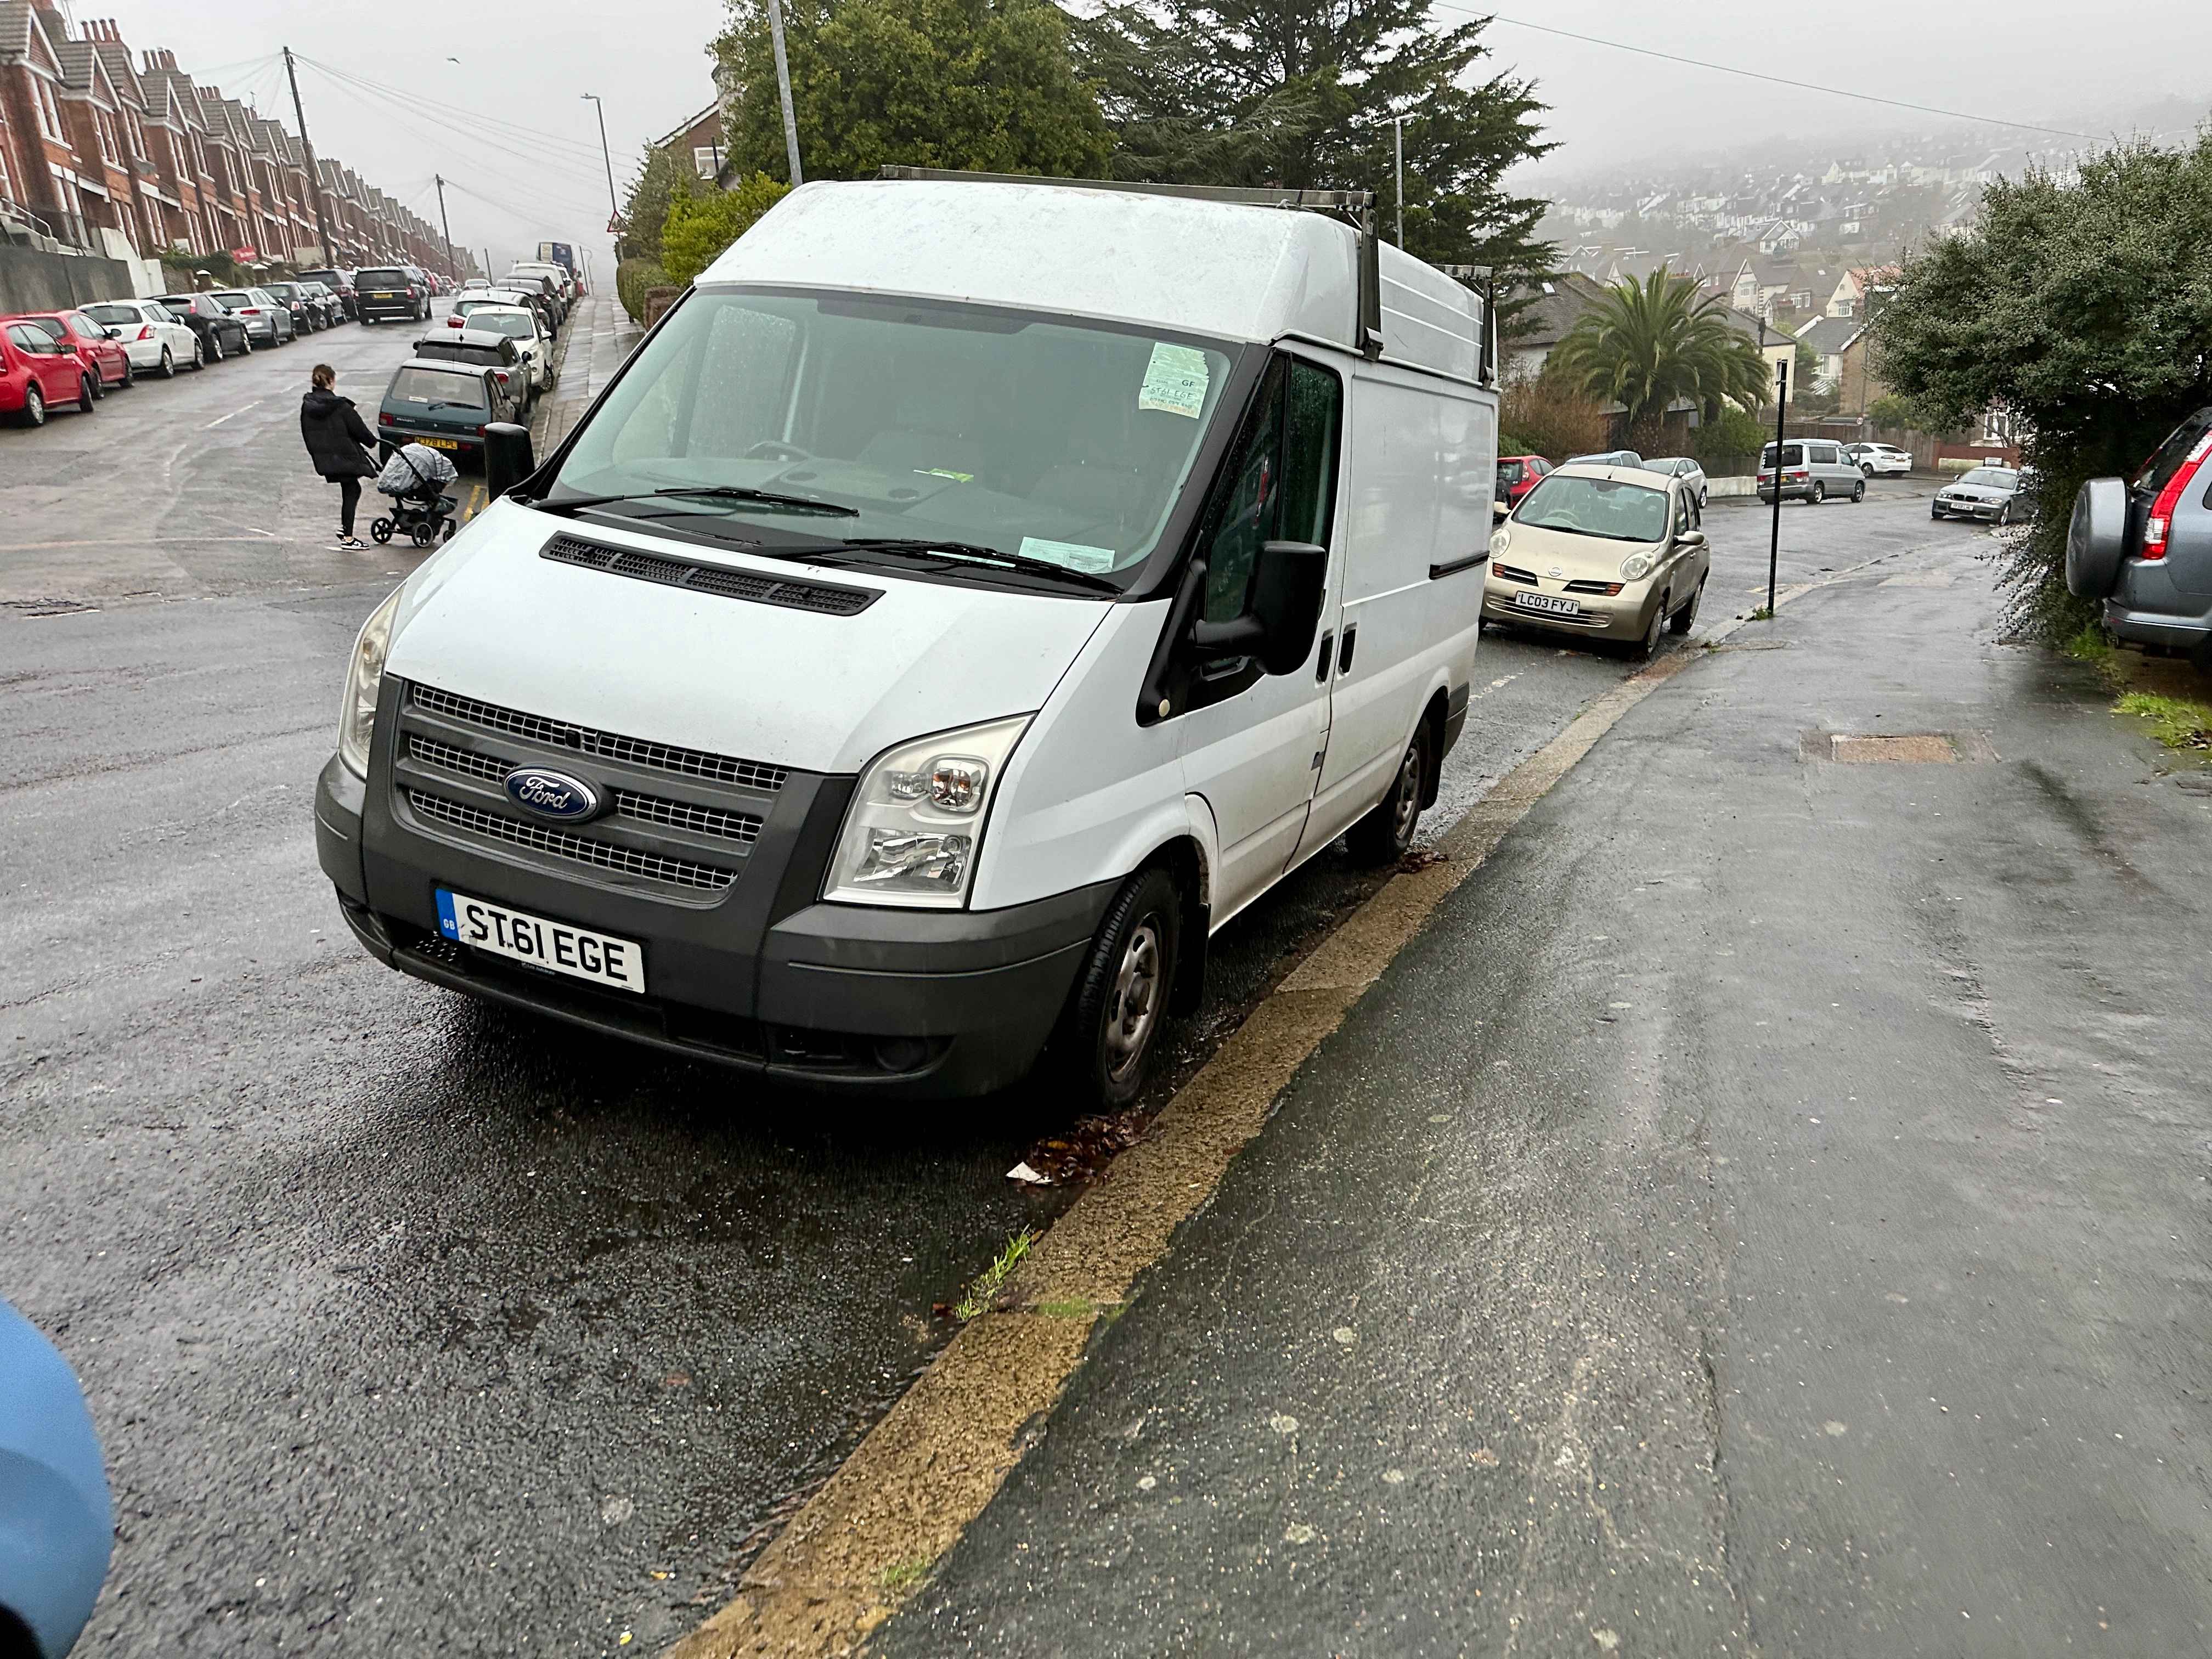 Photograph of ST61 EGE - a White Ford Transit parked in Hollingdean by a non-resident. The fifth of six photographs supplied by the residents of Hollingdean.